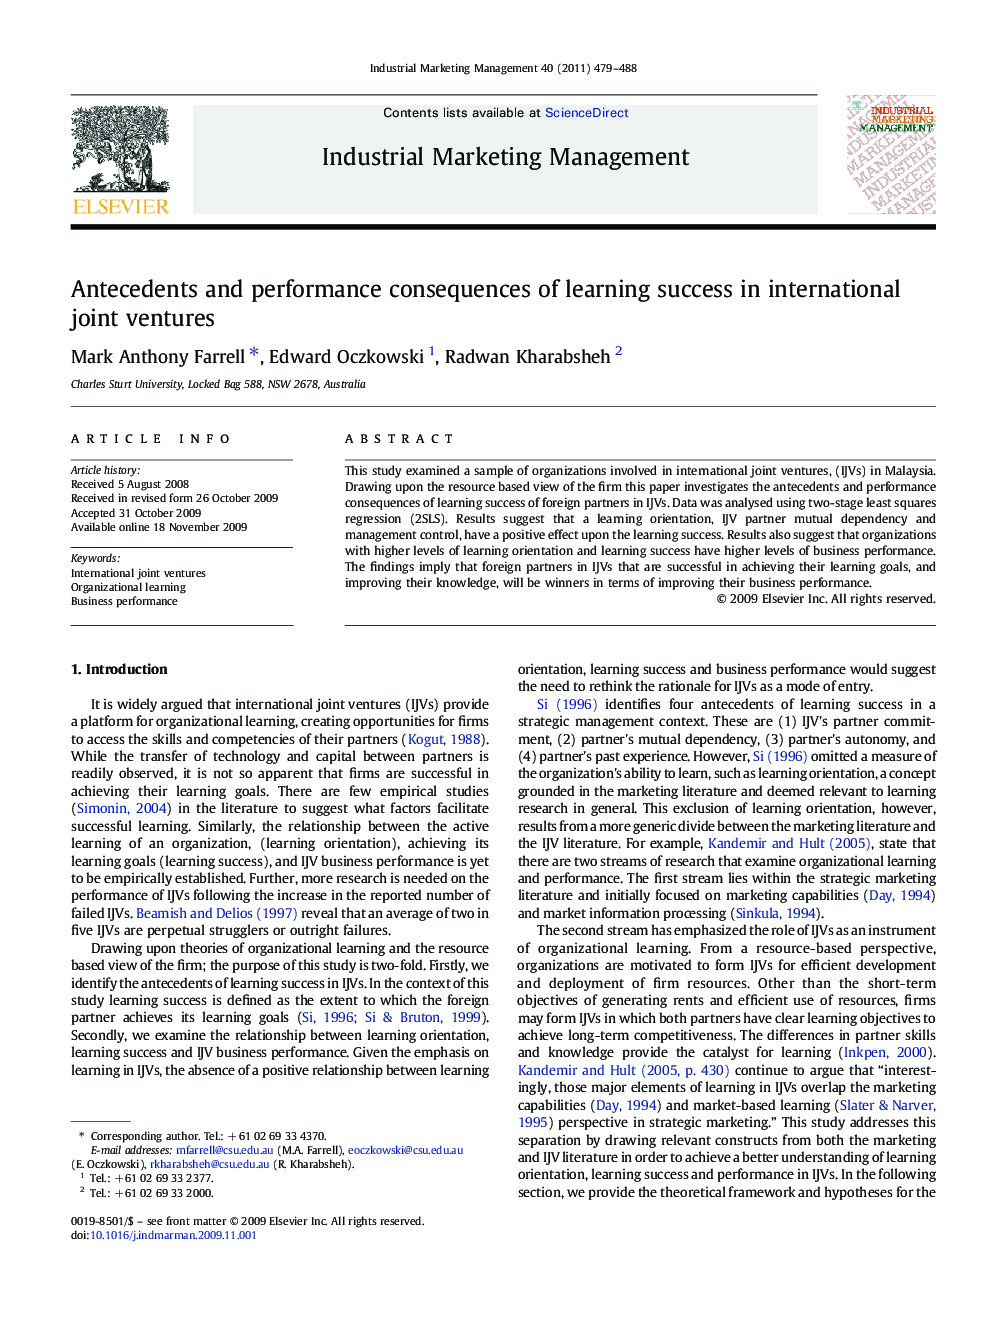 Antecedents and performance consequences of learning success in international joint ventures